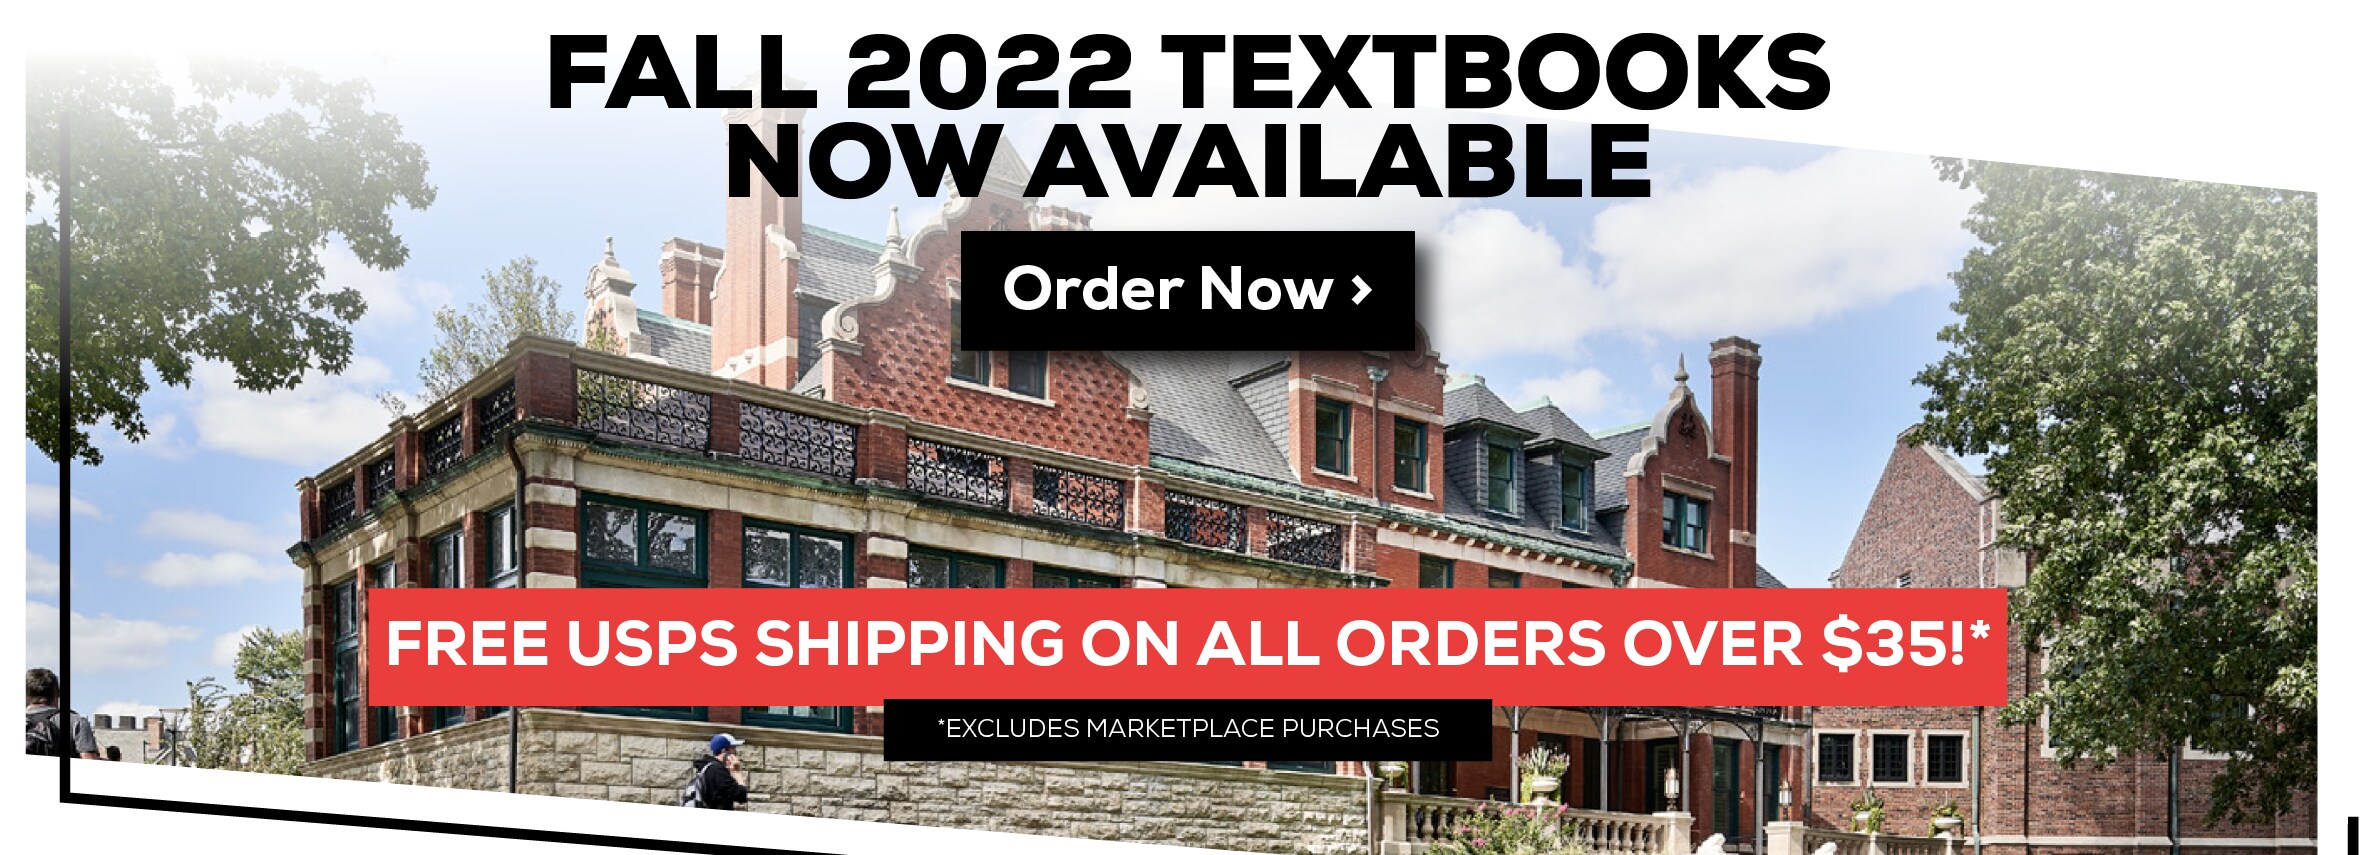 Fall 2022 Textbooks now available! Free shipping on all orders over $35!* *Excludes marketplace purchases. Order Now